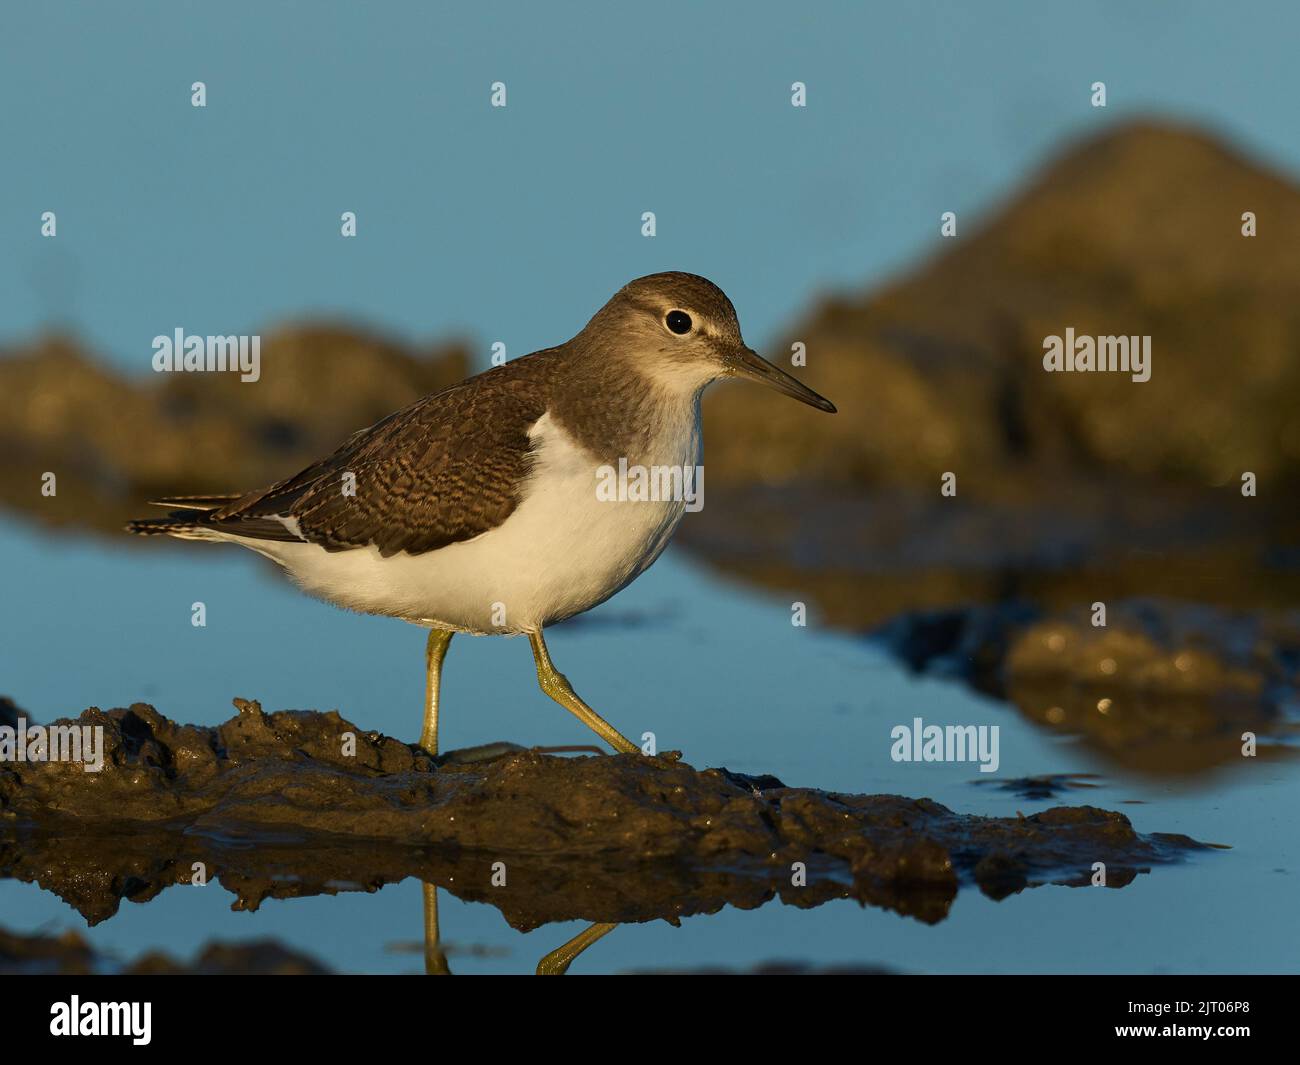 Common sandpiper (Actitis hypoleucos) in its natural environment Stock Photo